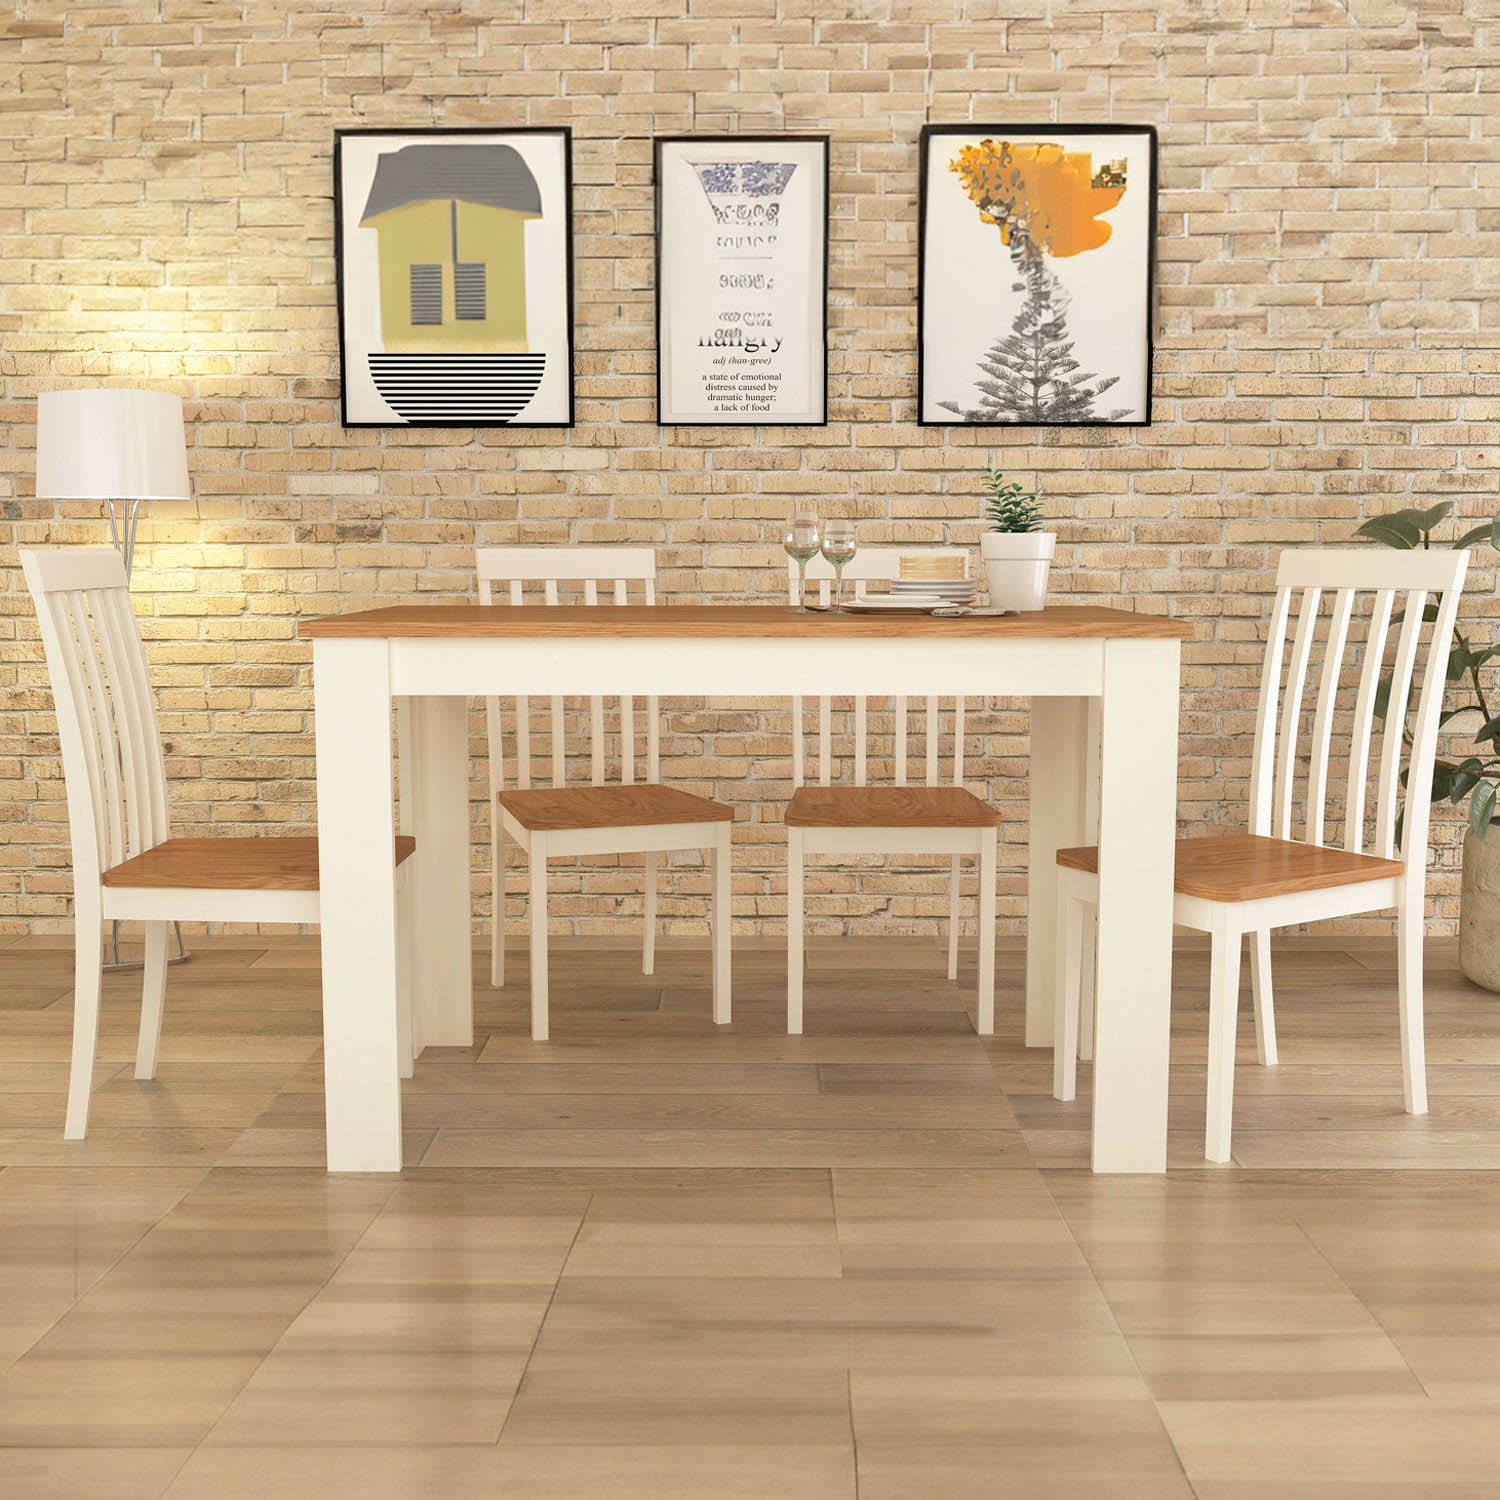 Lexington 4 Seater Wooden Dining Set Cream and White Image 1